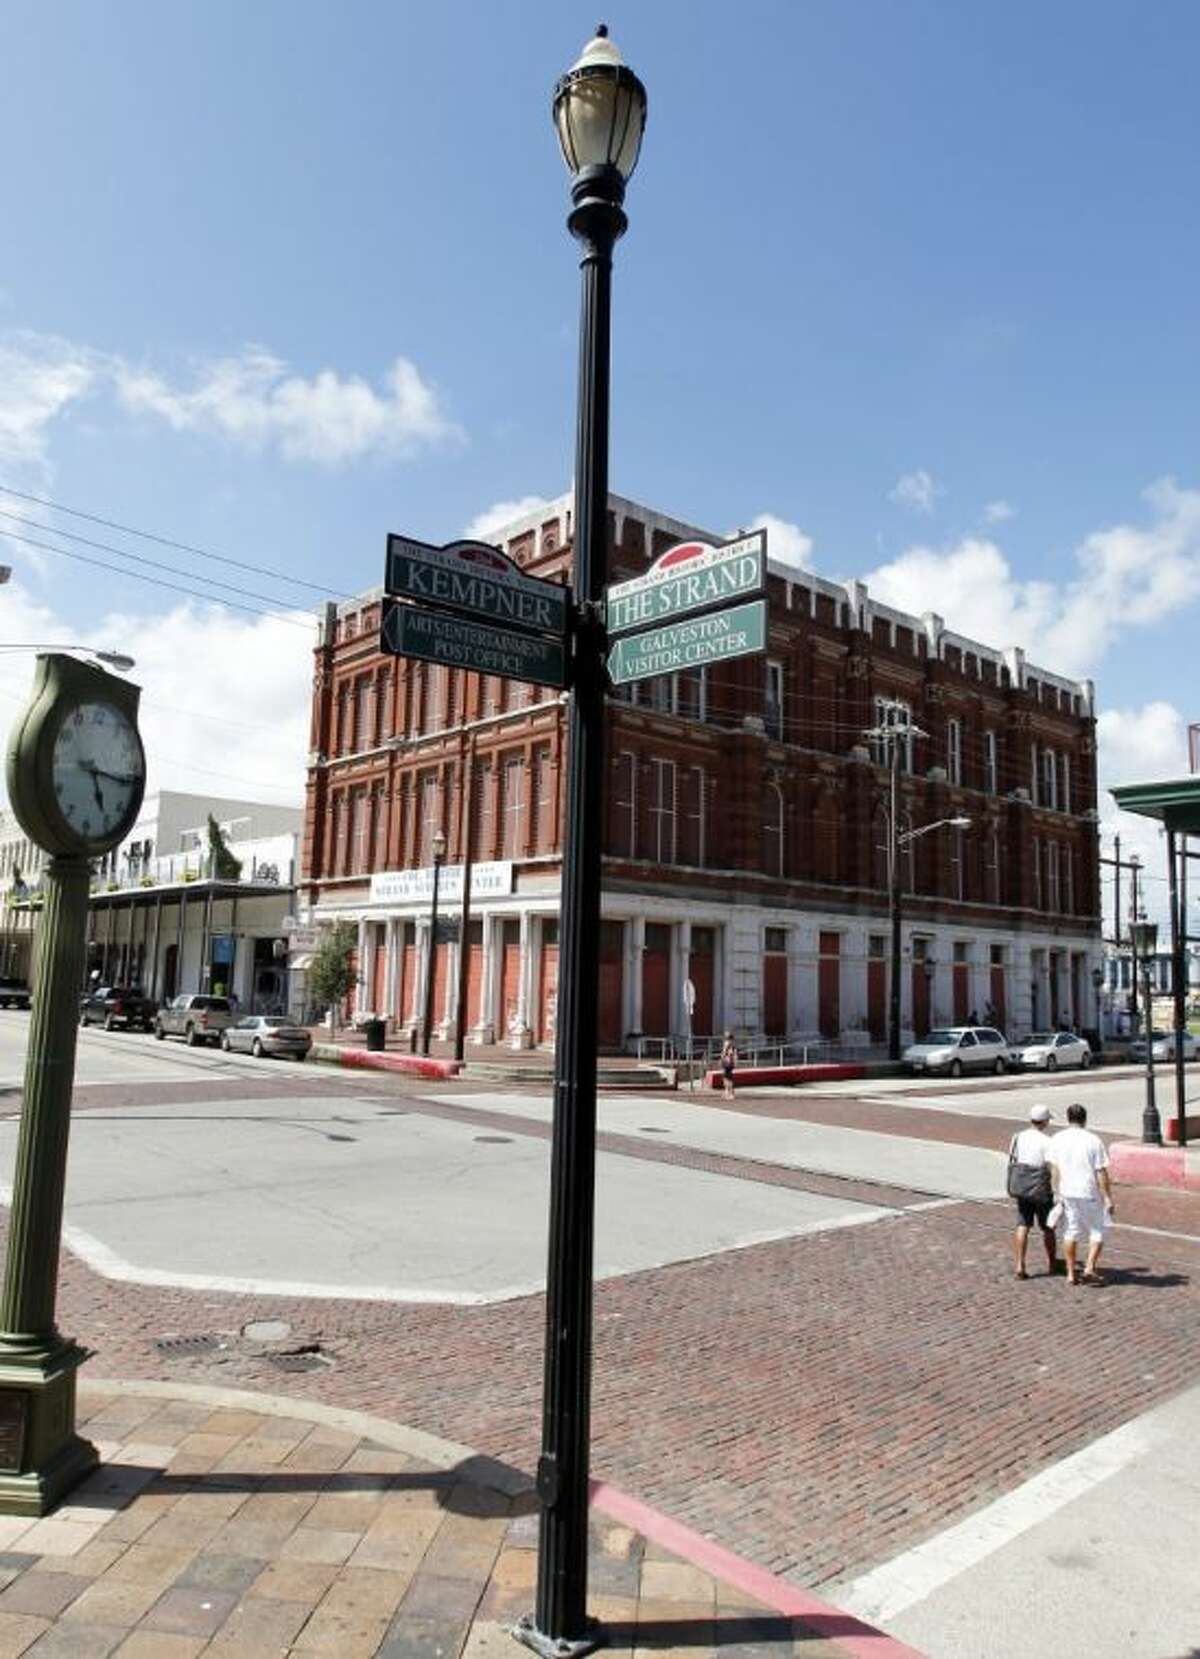 In this Oct. 3, 2013, photo shows the Strand in Galveston, Texas, which has been named one of 2013’s “Great Streets” by the American Planning Association. The street was once called “the Wall Street of the Southwest.”